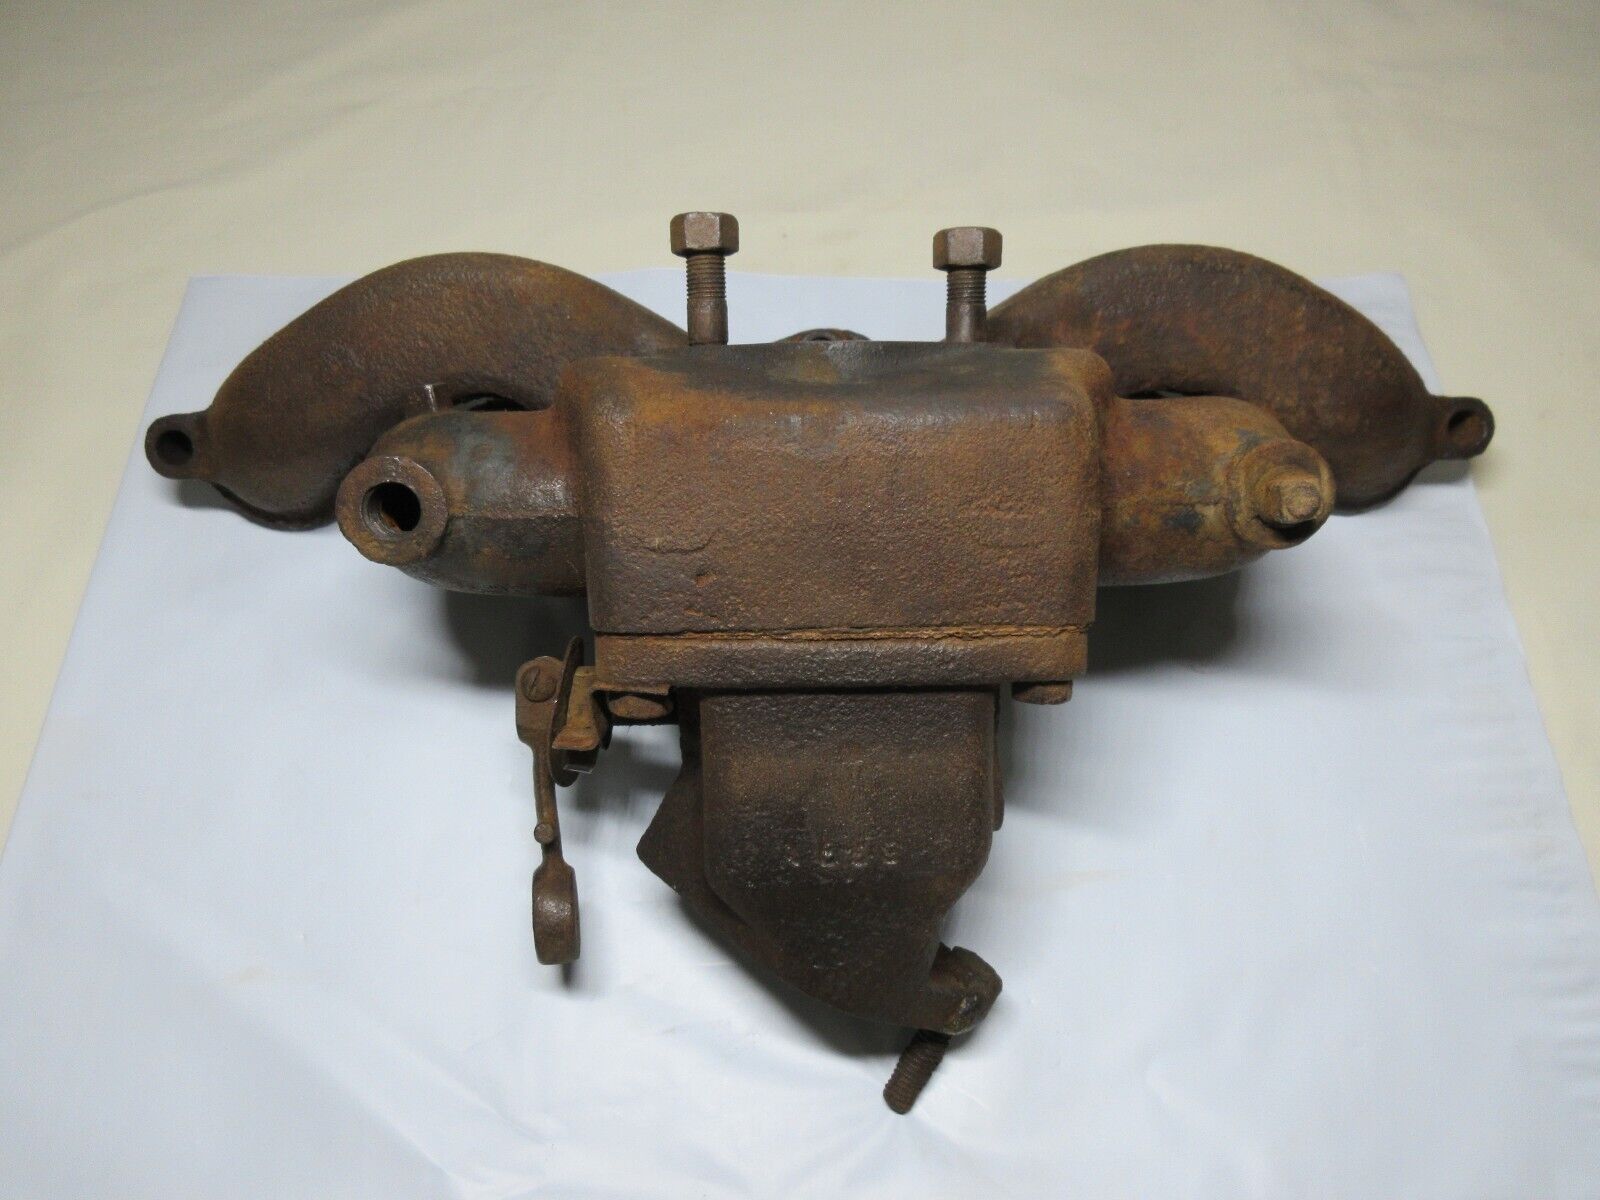 Ford GPW Jeep Willys MB L134 Motor A1163 Intake Manifold & A659 Exhaust Manifold